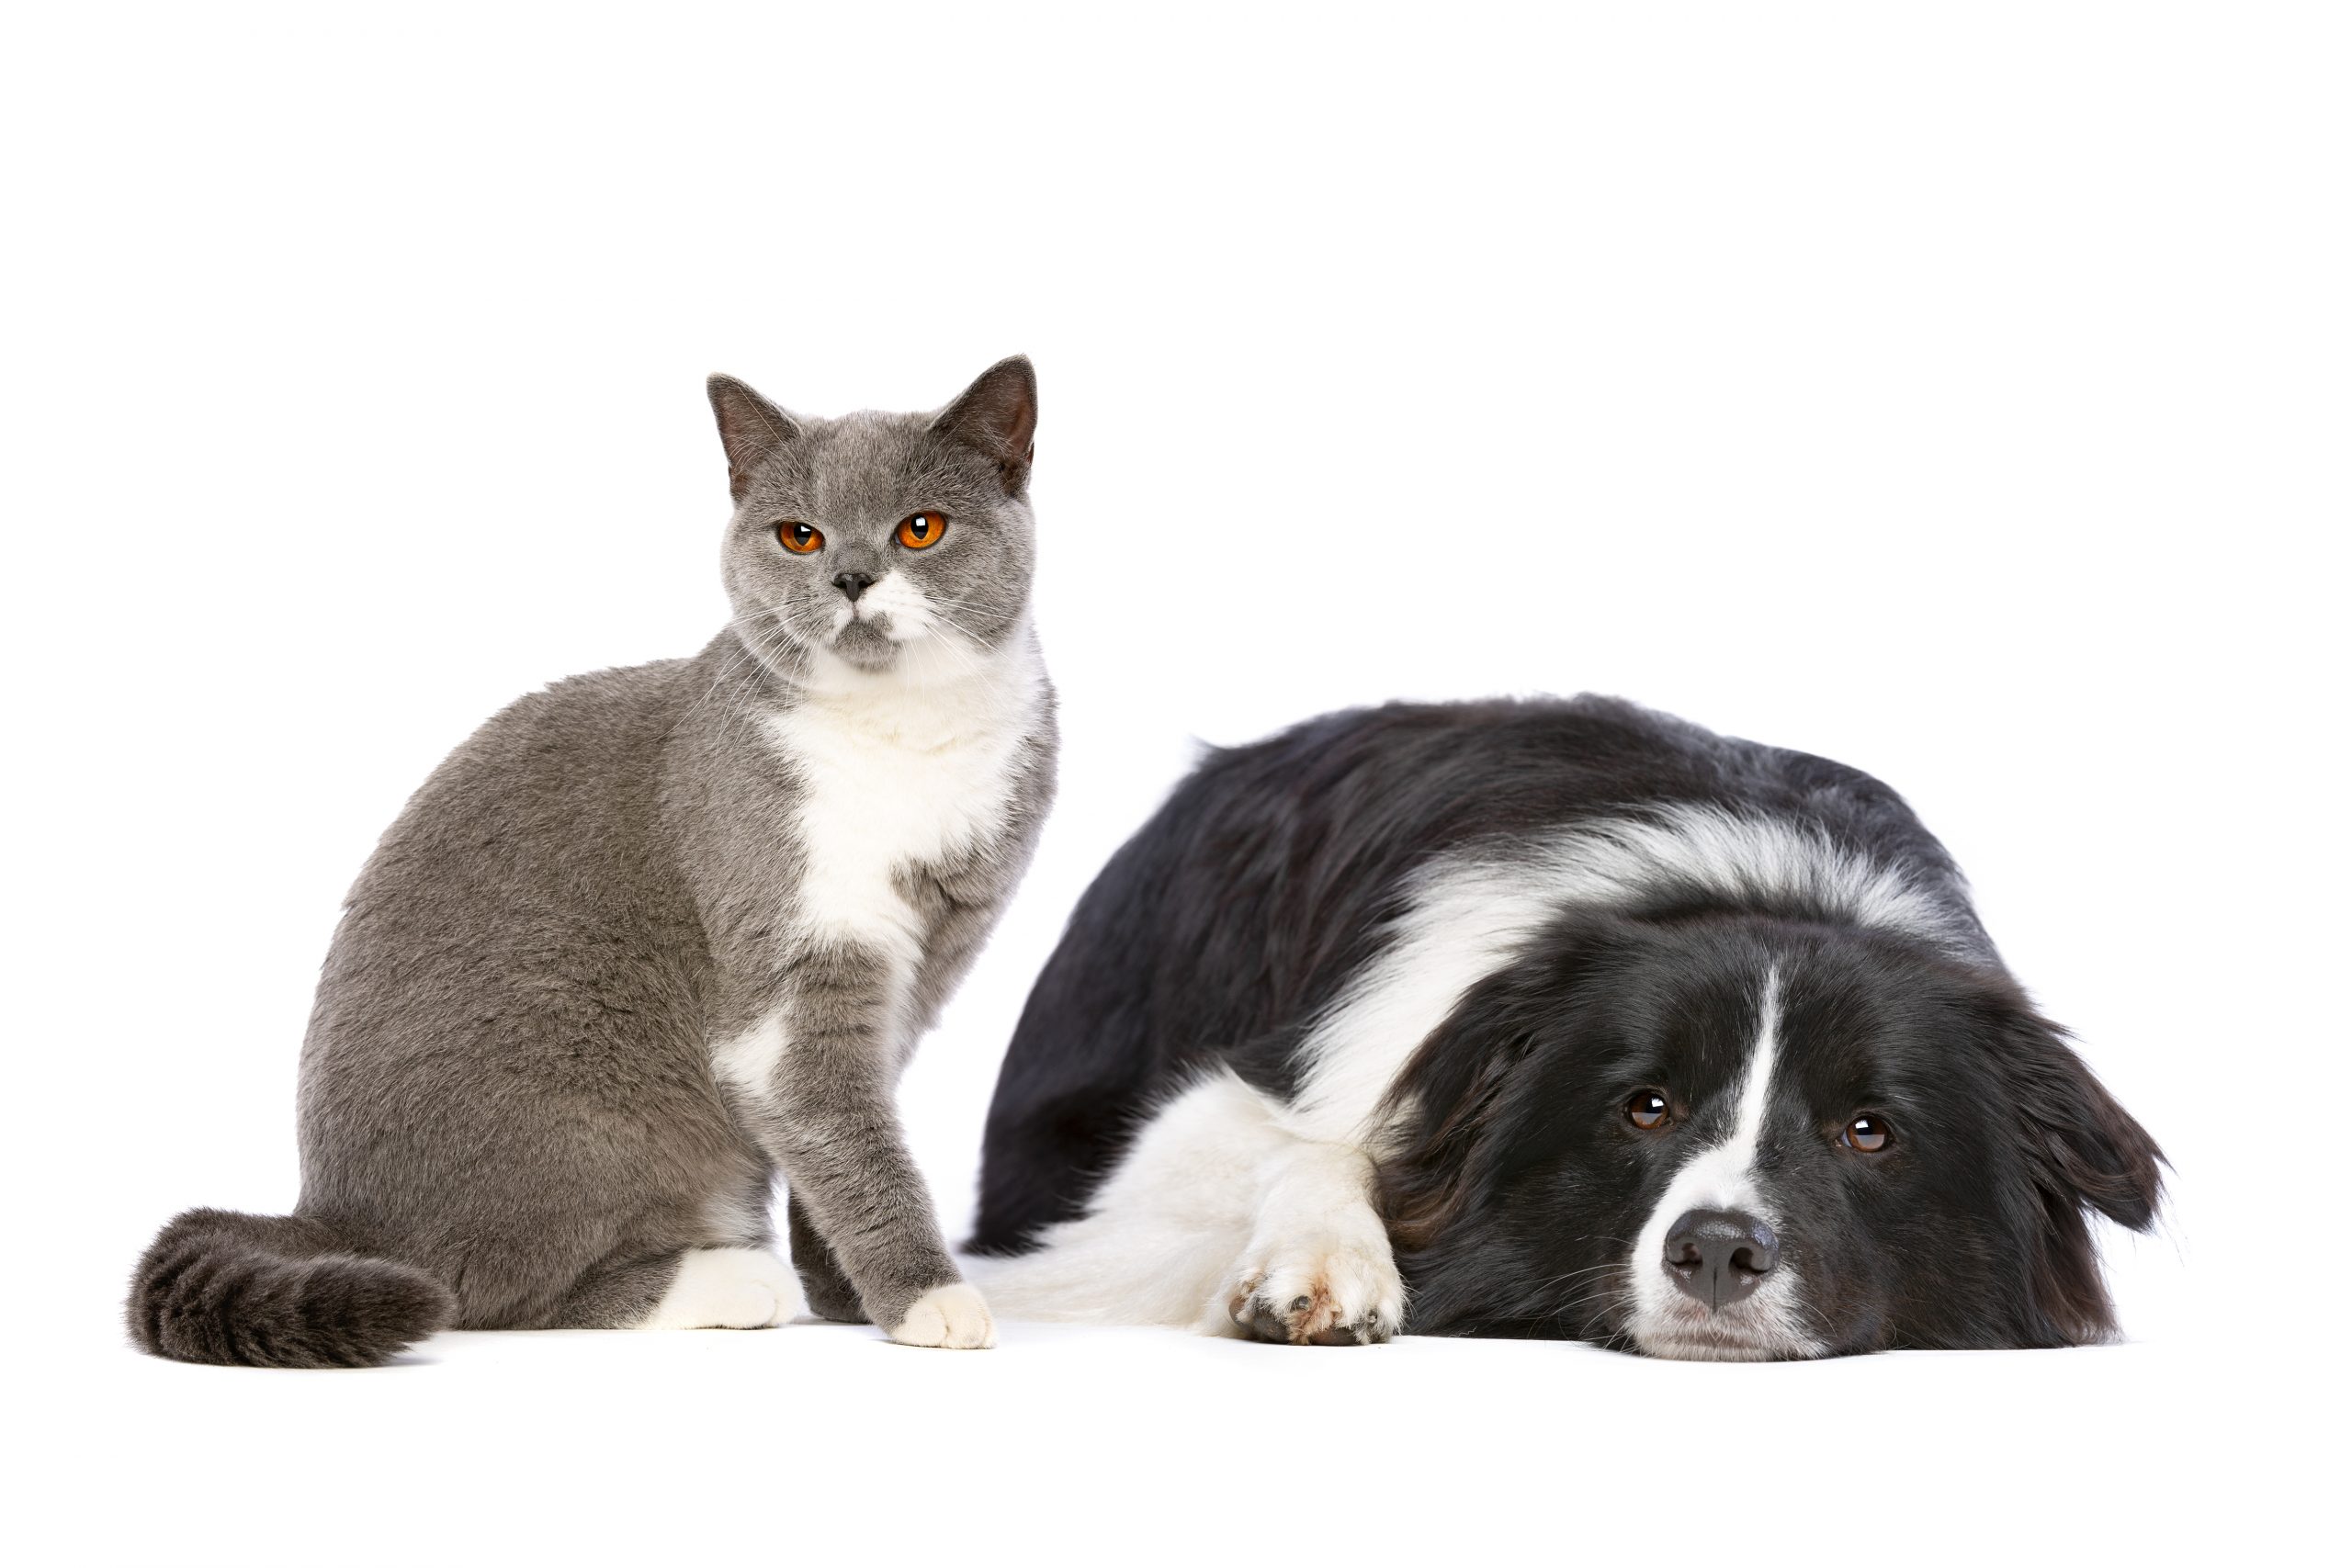 http://pugedon.com.tr/wp-content/uploads/2020/02/dog-and-cat-C92GFBS-scaled.jpg